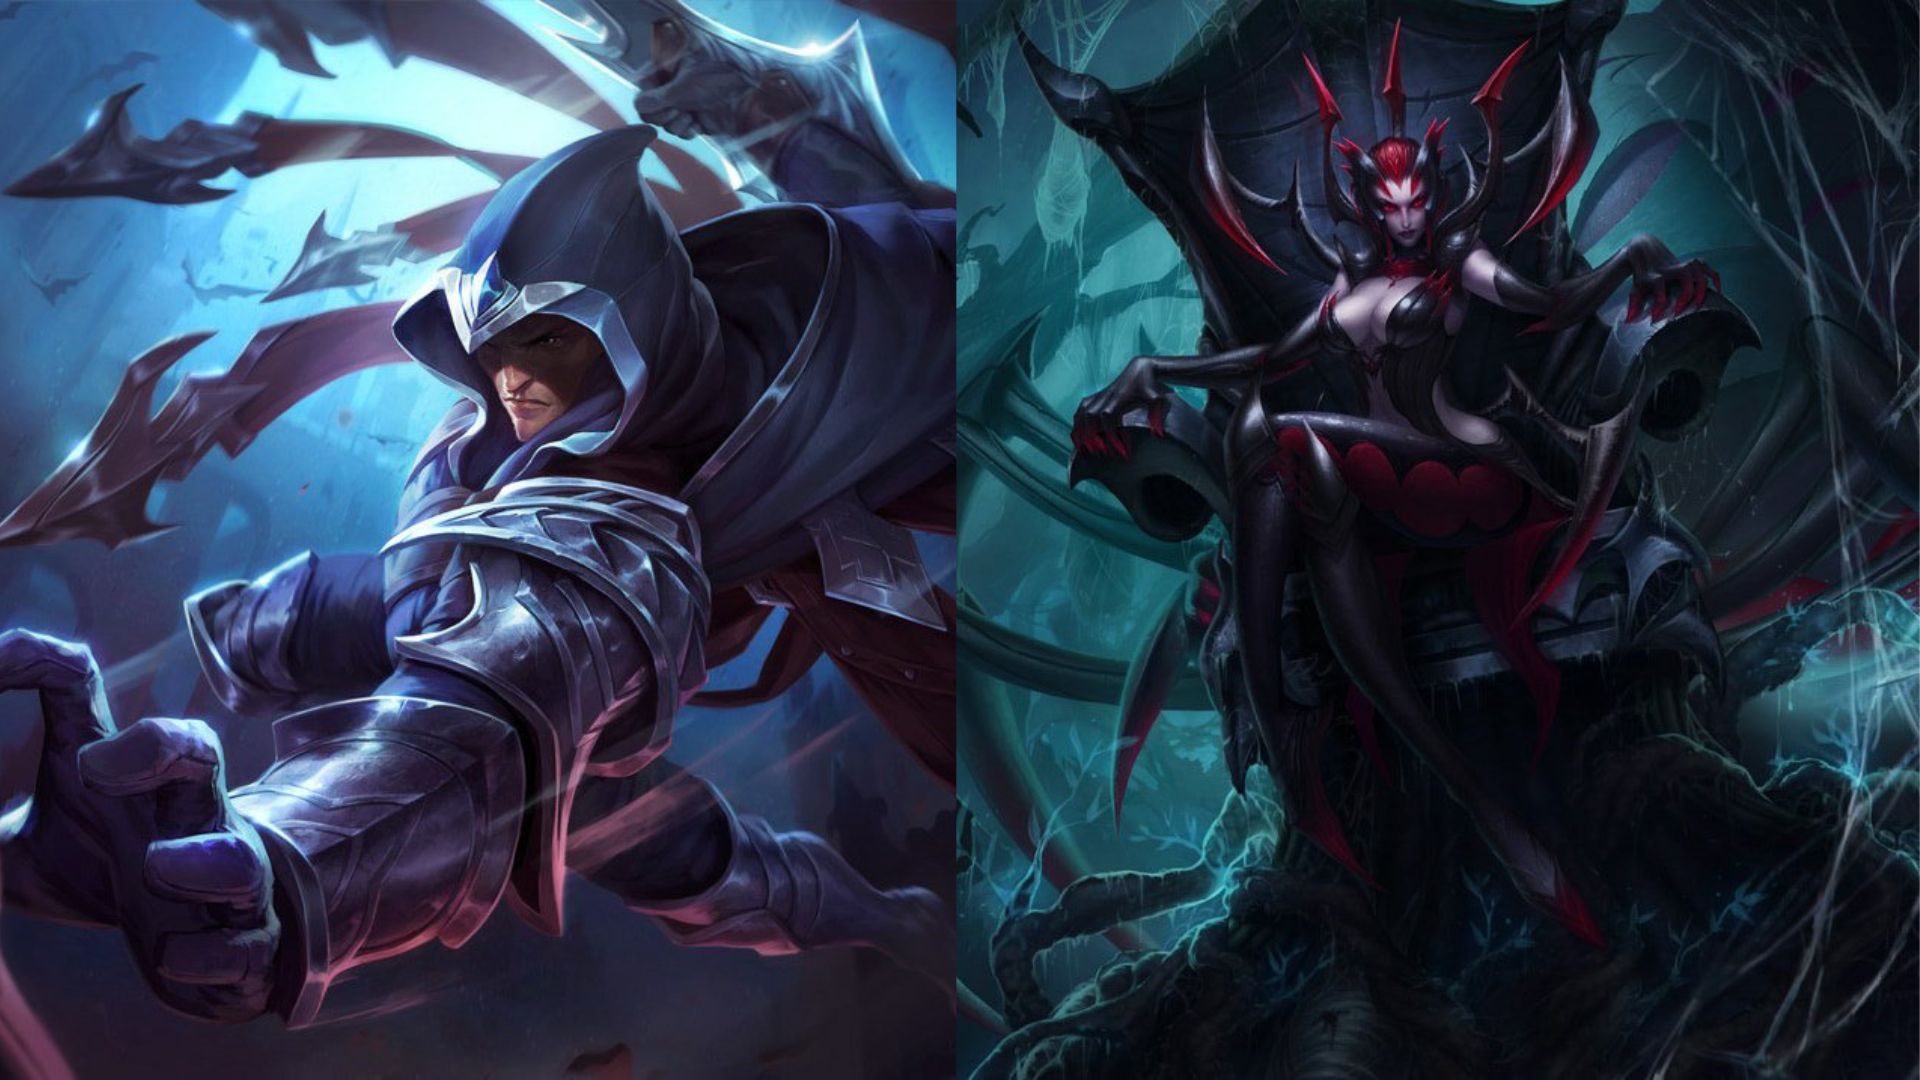 Talon and Elise Mid Lane and Jungle Champion Pairs in LoL